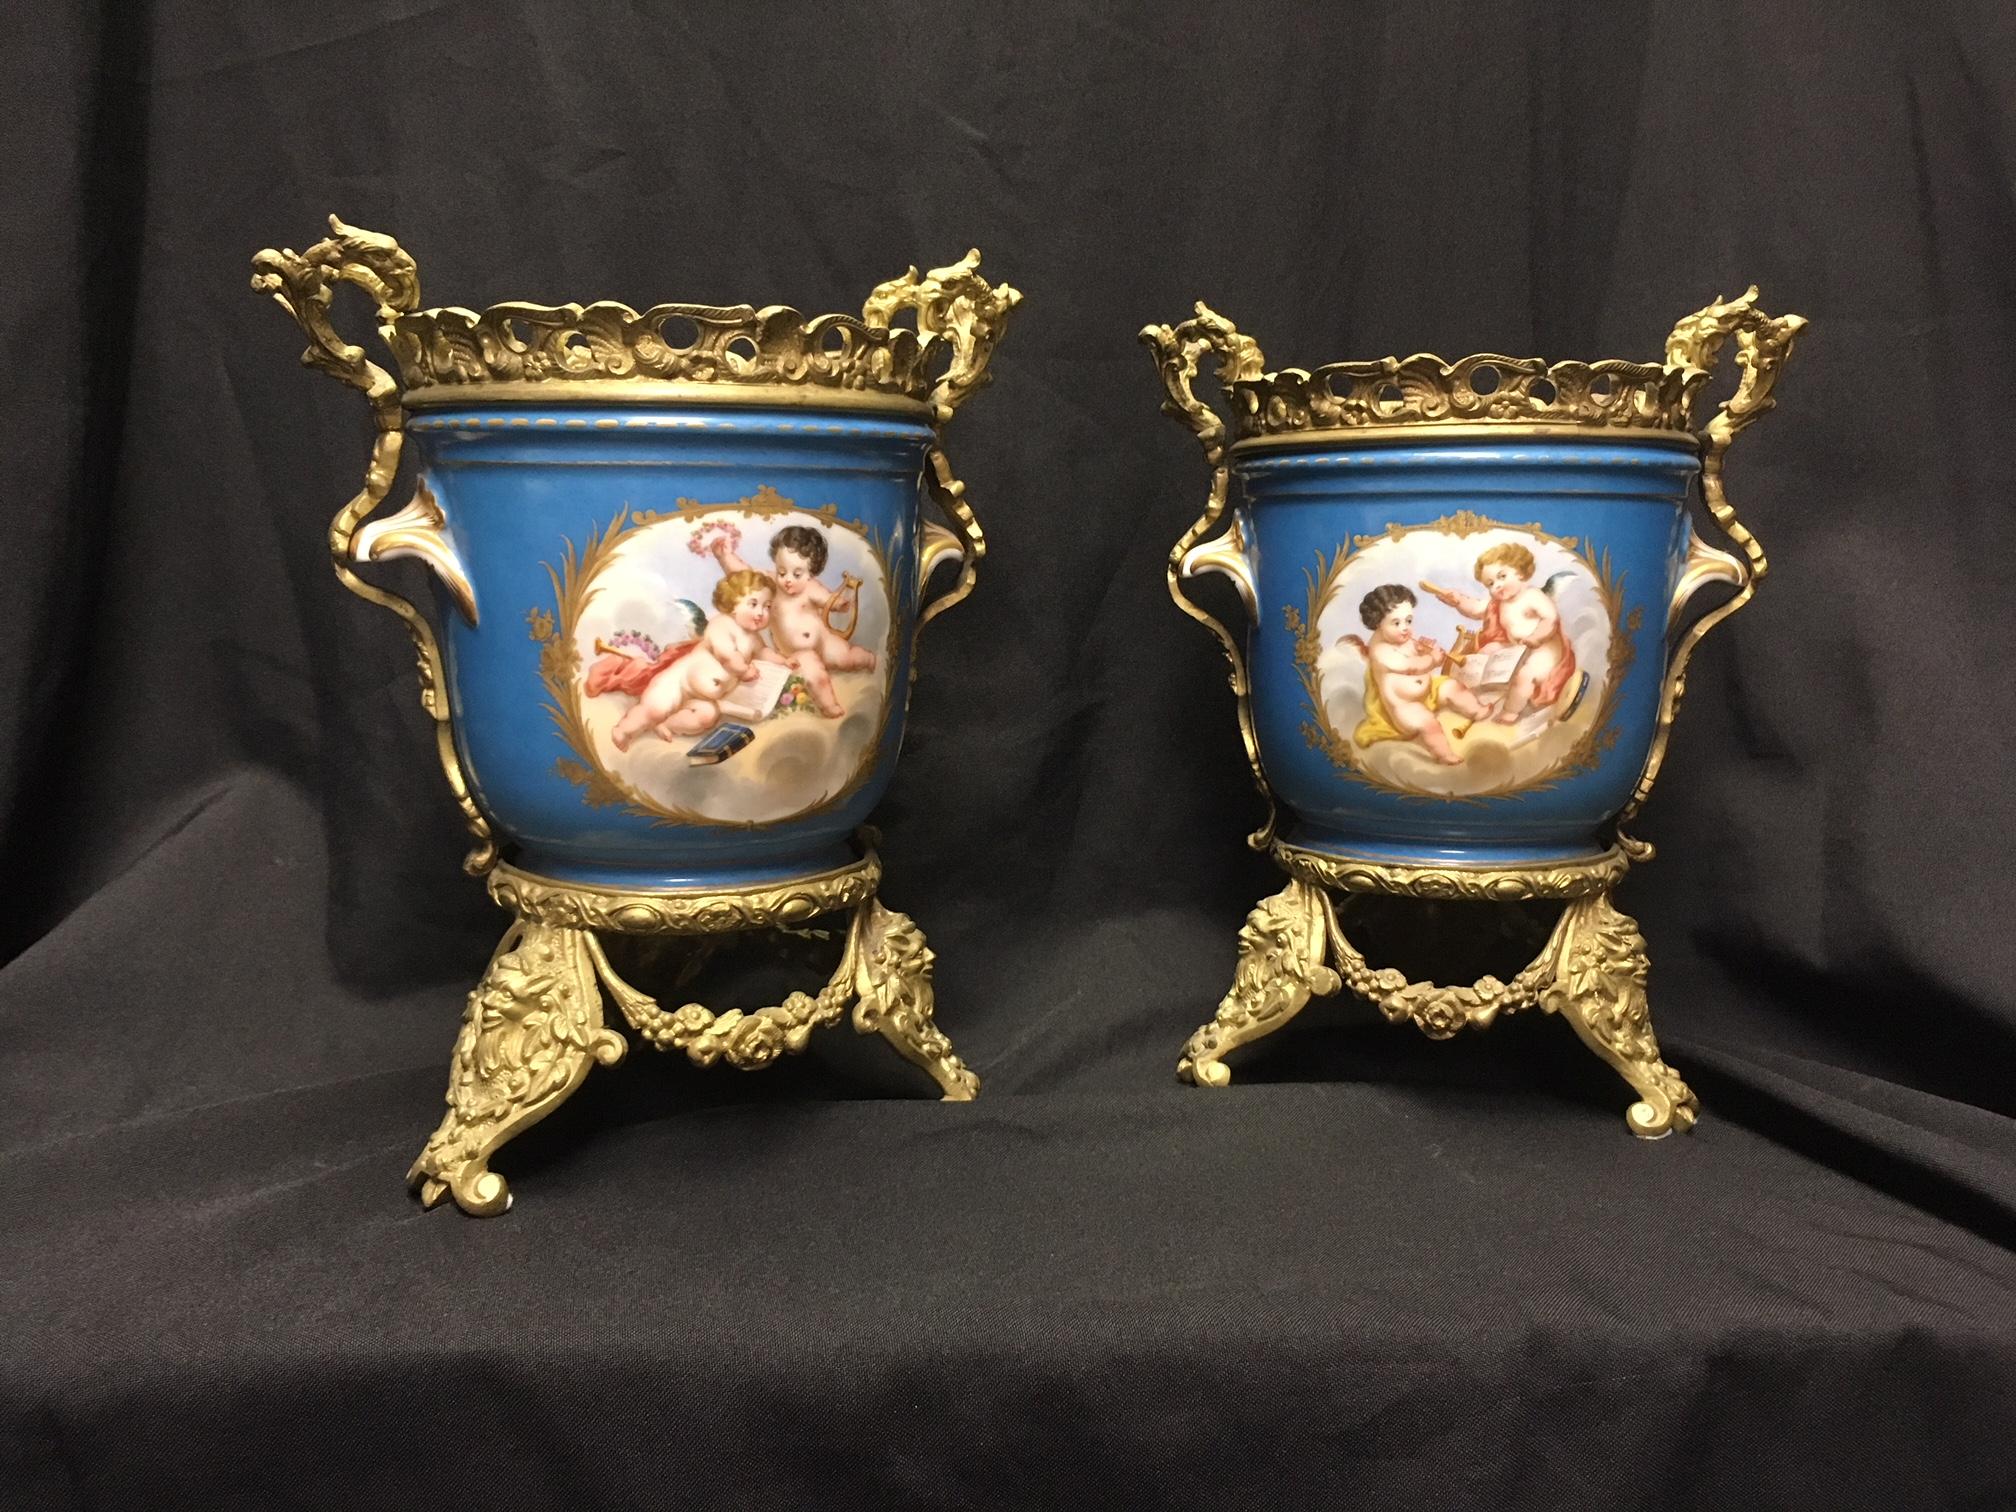 Louis XVI Pair of French Sevres Style Ormolu-Mounted Porcelain Planters